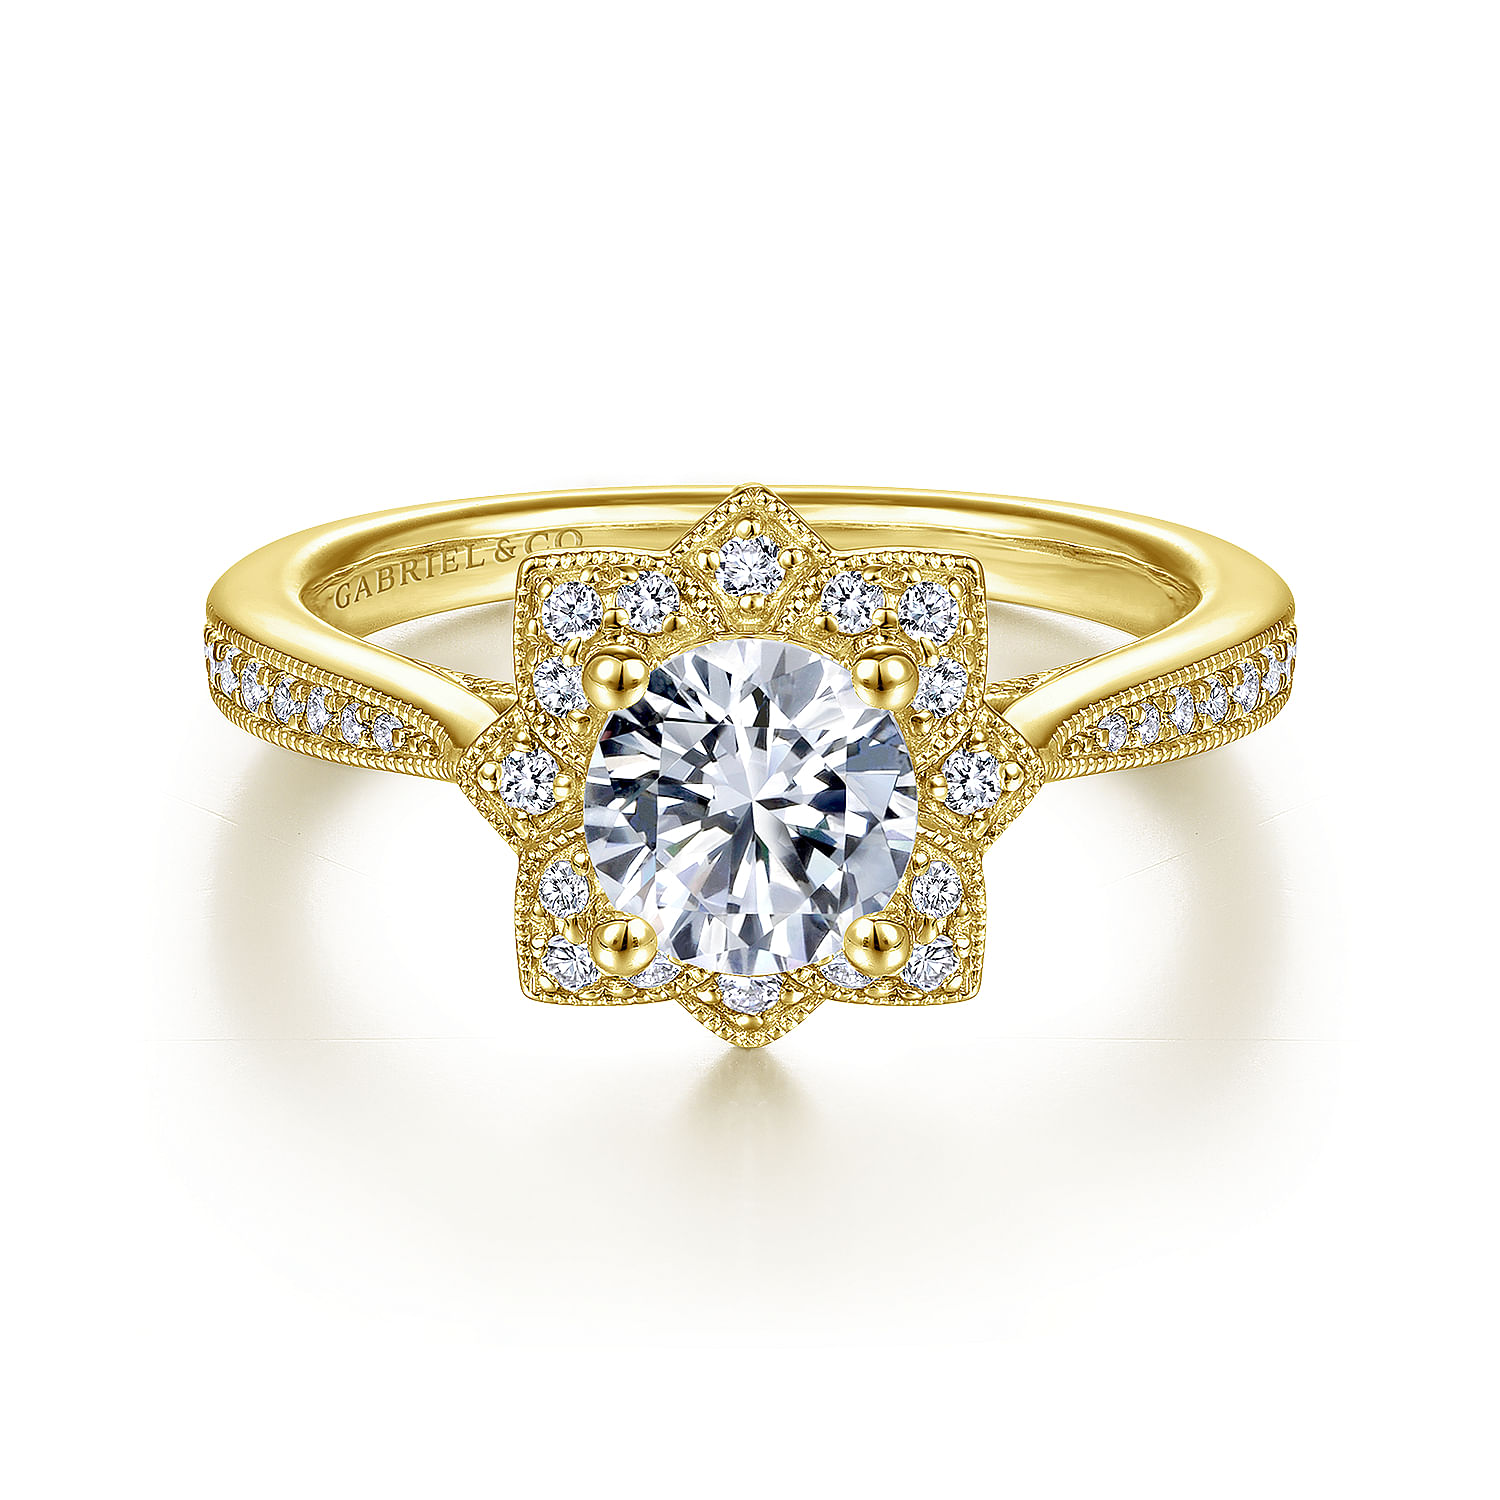 Gabriel - Unique 14K Yellow Gold Vintage Inspired Halo Diamond Engagement Ring